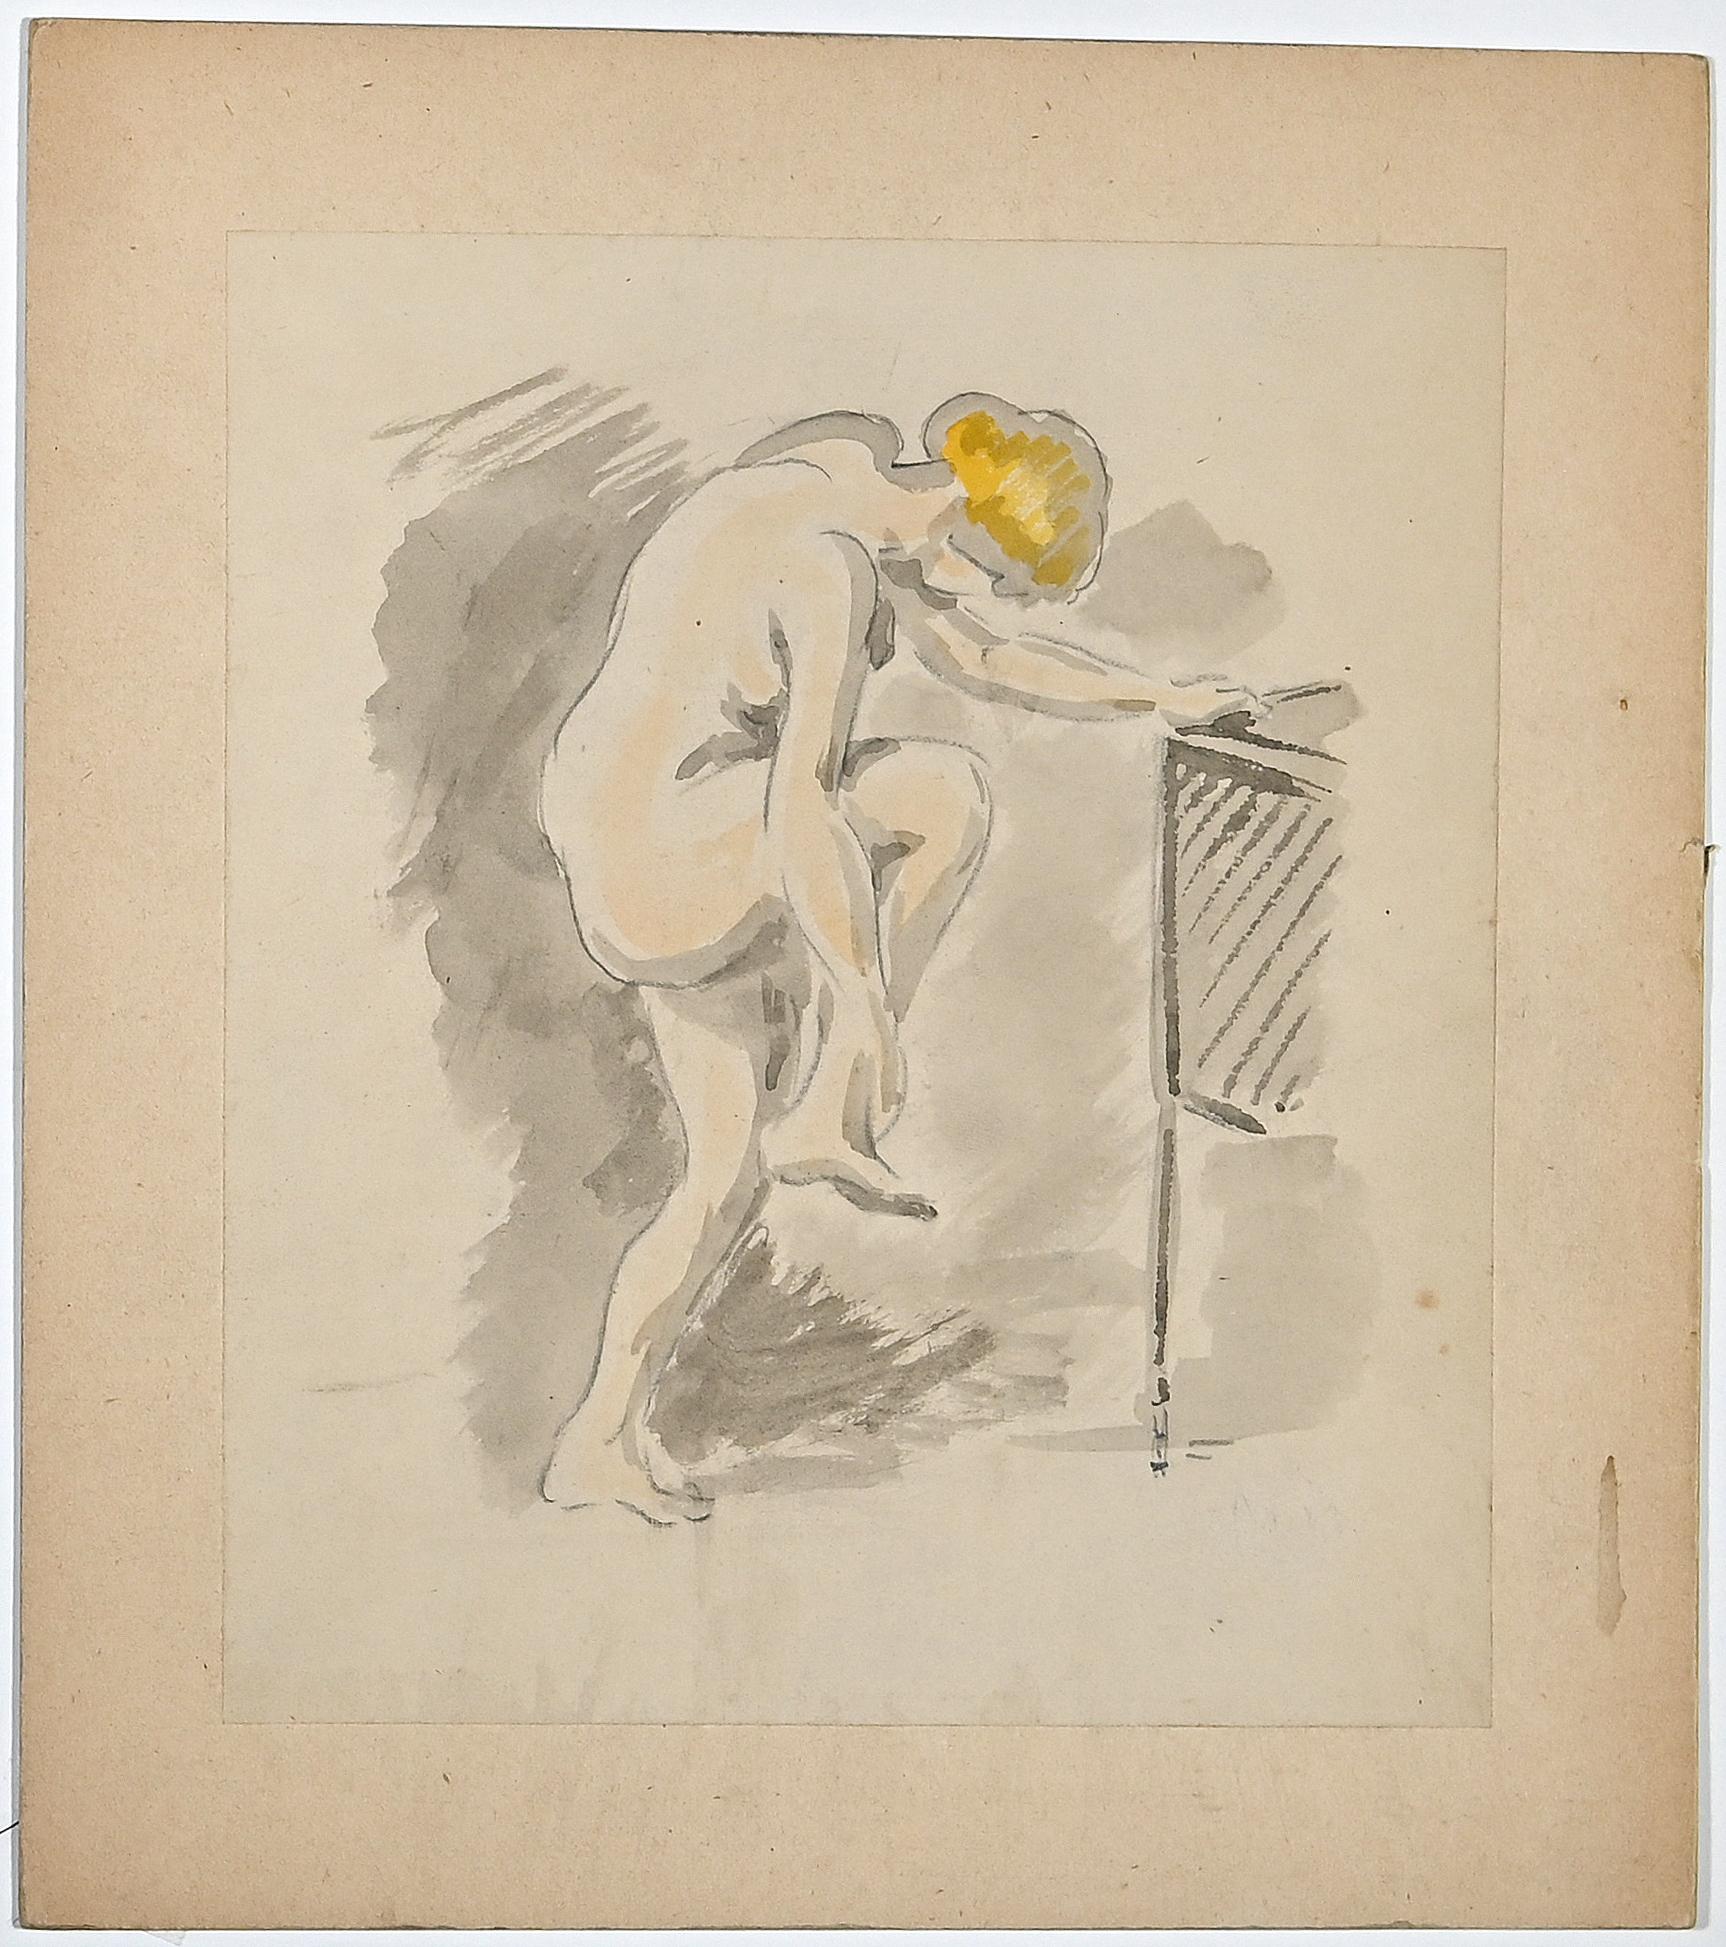 Nude of Woman is an Ink and Watercolor drawing realized by Gaspard Maillol (1880-1946).

Good condition on a yellowed cardboard, included a white cardboard passpartout (51x35 cm).

No signature.

Gaspard Maillol , born on July 10 , 1880 in Barcelona